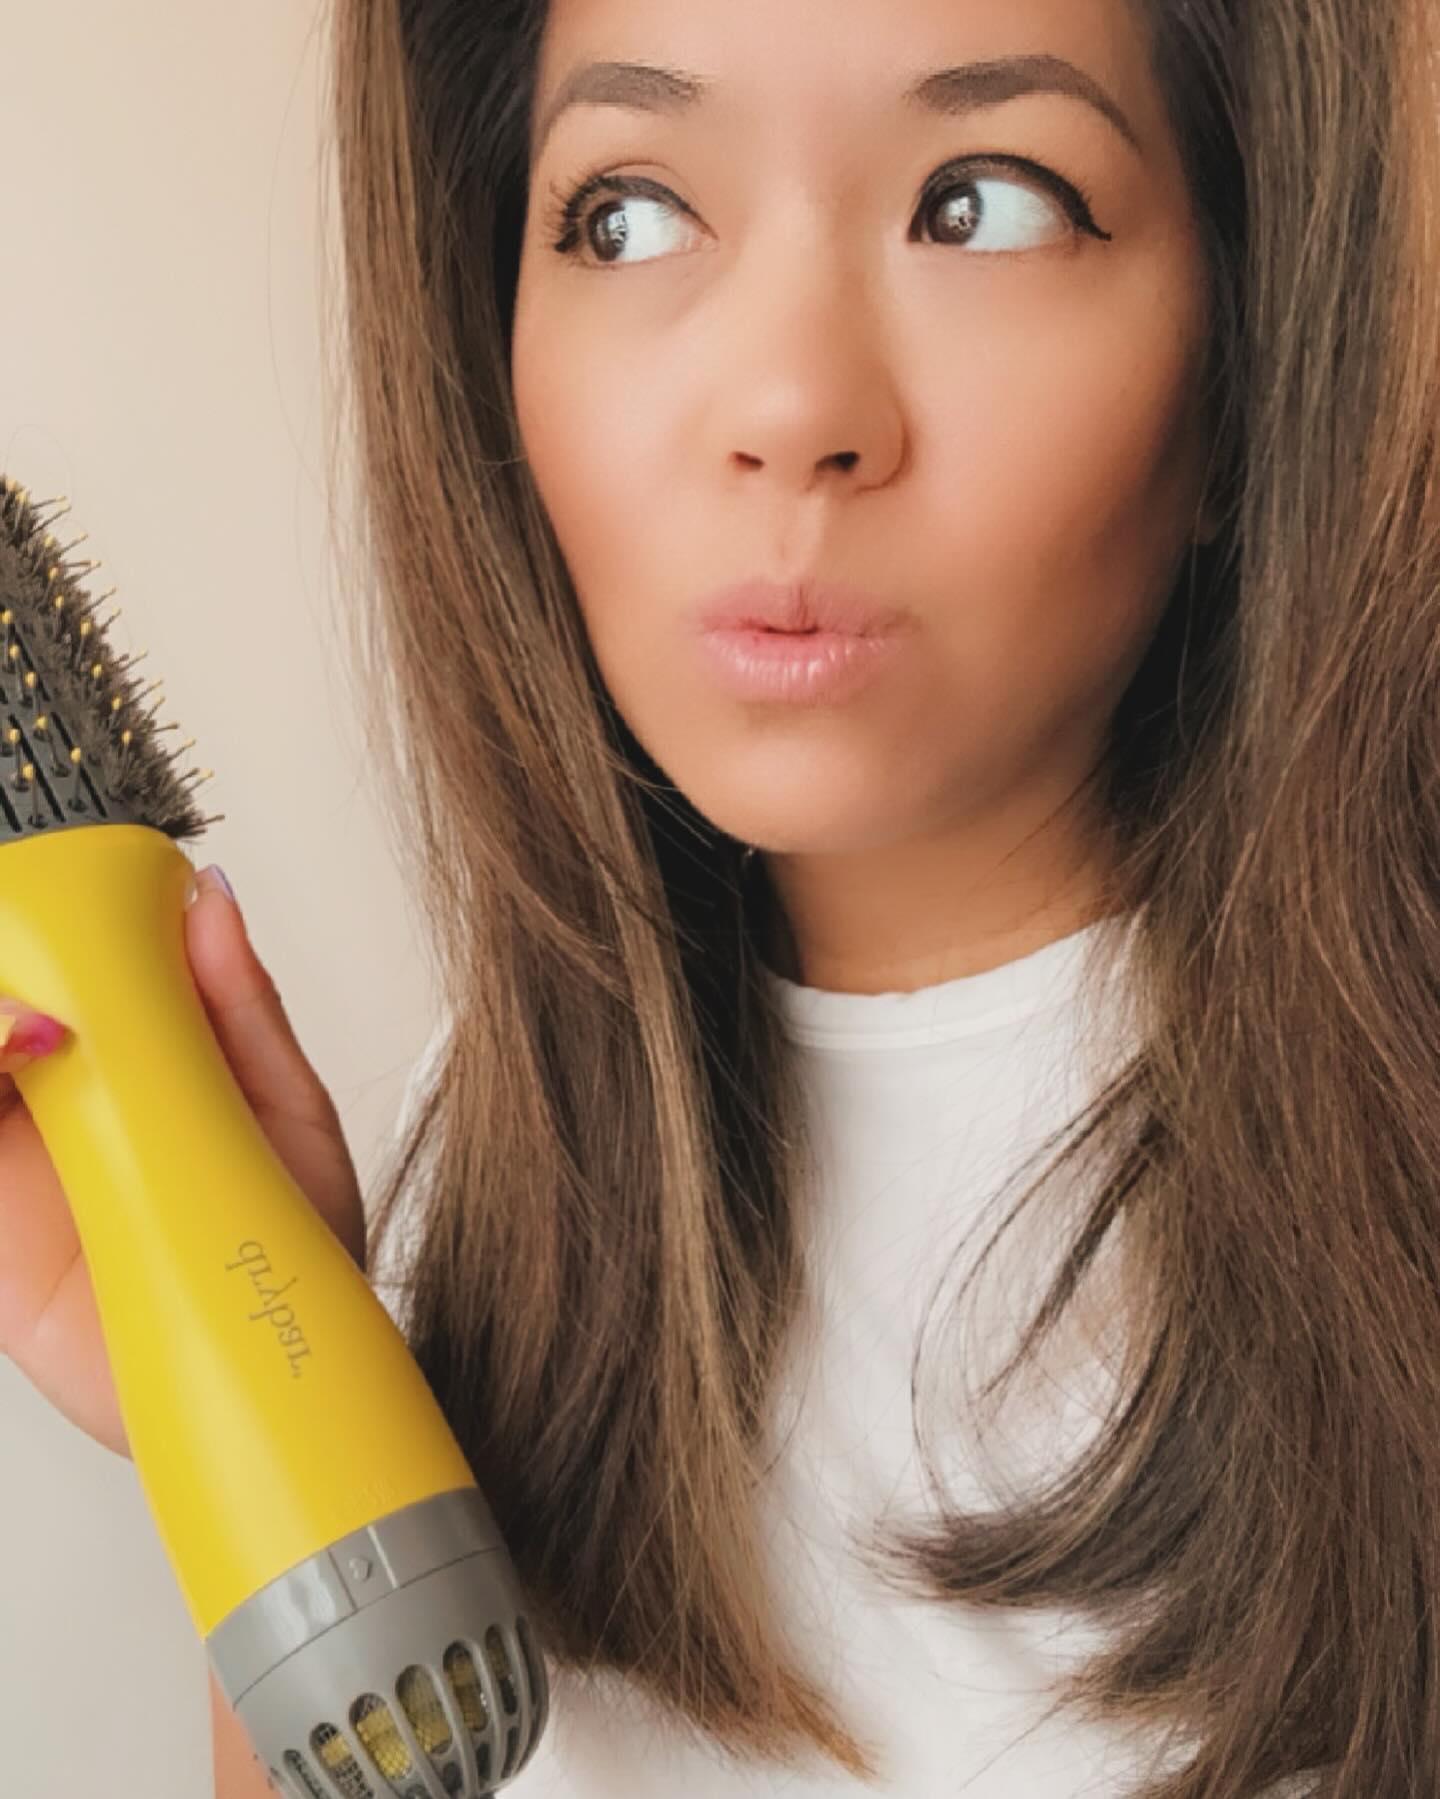 Can’t live without my single shot round blow-dryer brush! Shot out to @thedrybar! 💛

#drybar #sponsorme #hair #beautiful #beauty #fashion #fashionblogger #beautybloggers